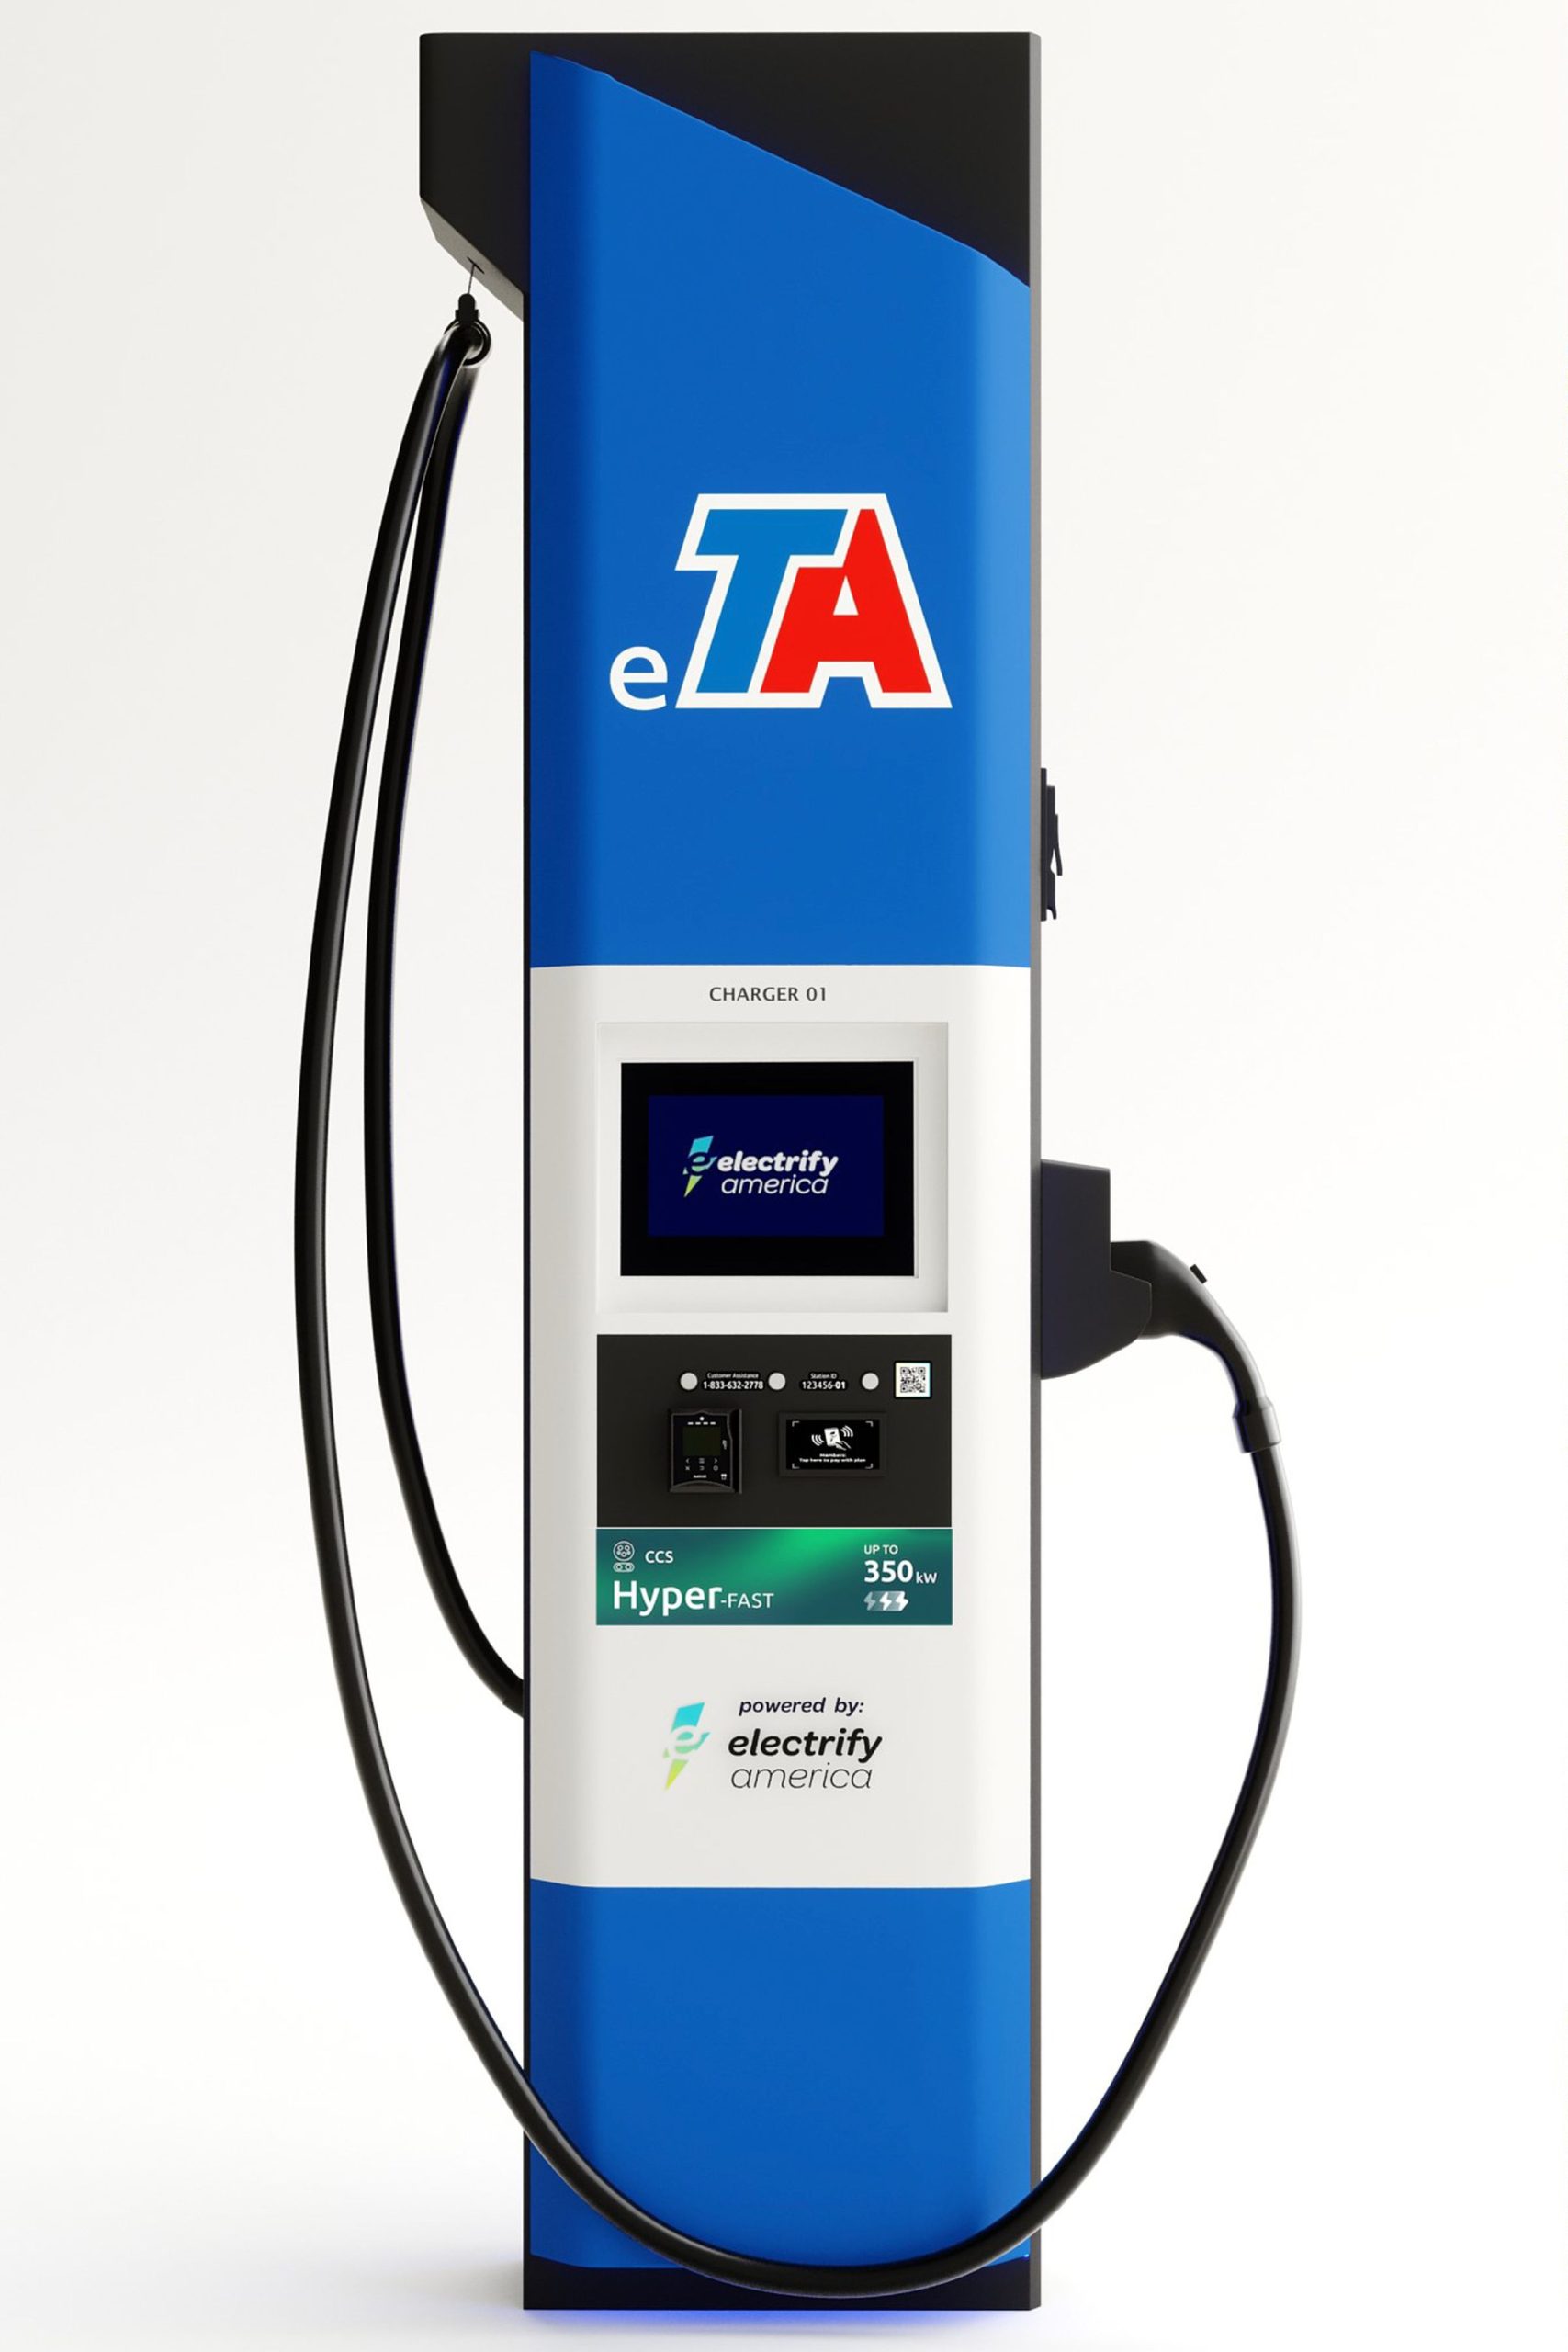 TravelCenters of America buys 1,000 Electrify America DC fast chargers